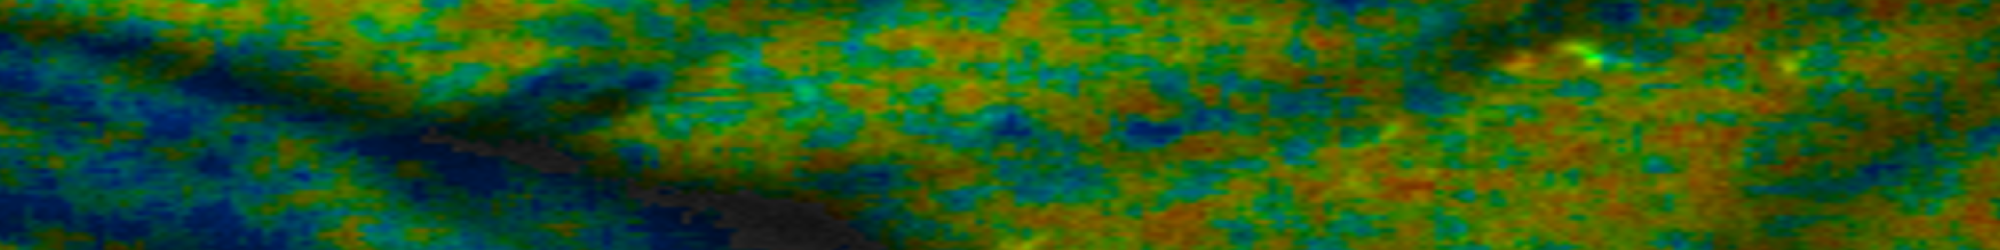 2-photon in Vivo FLIM imaging obtained from Dr. Periasamy, Keck Center for Cellular Imaging